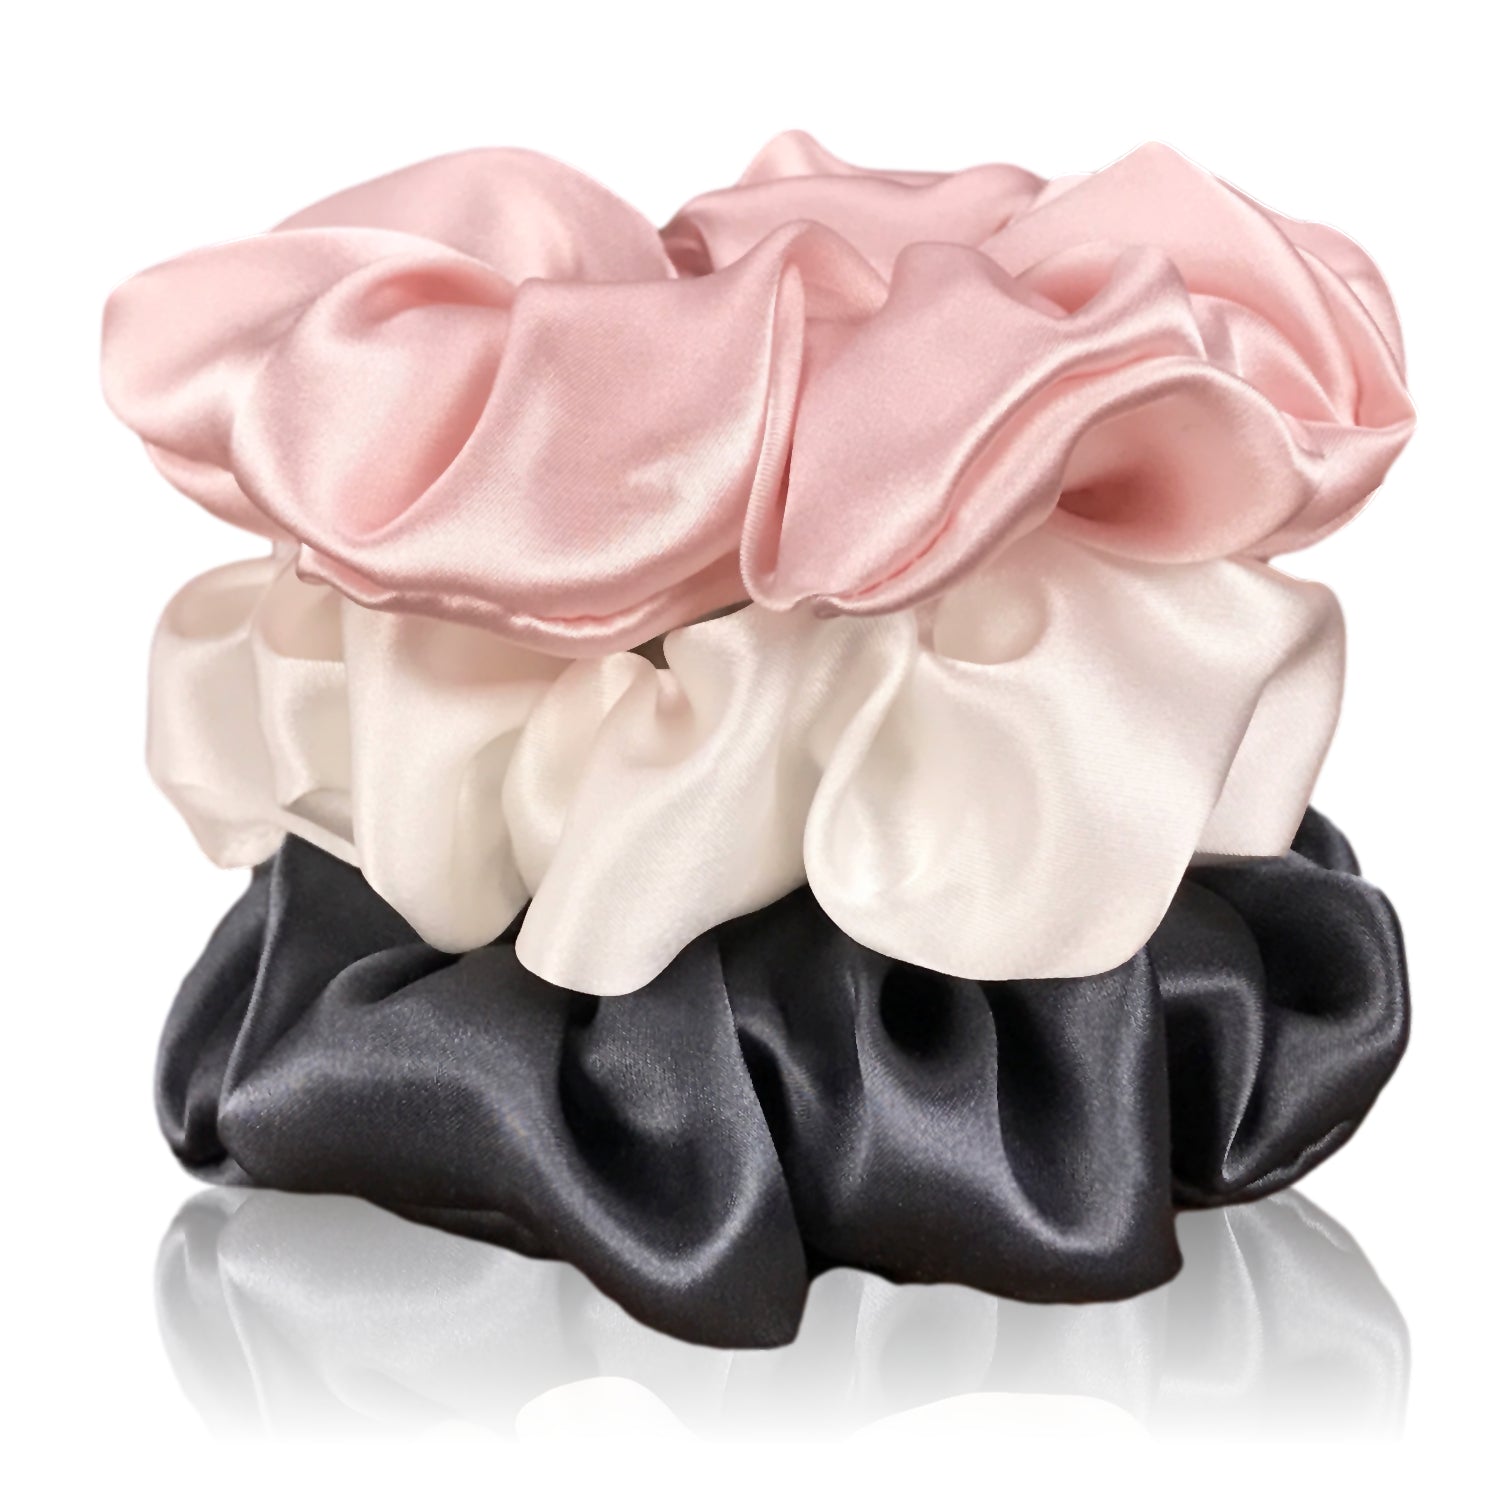 Hair Ties - Charcoal Ivory and Pink (Large) Celestial Silk